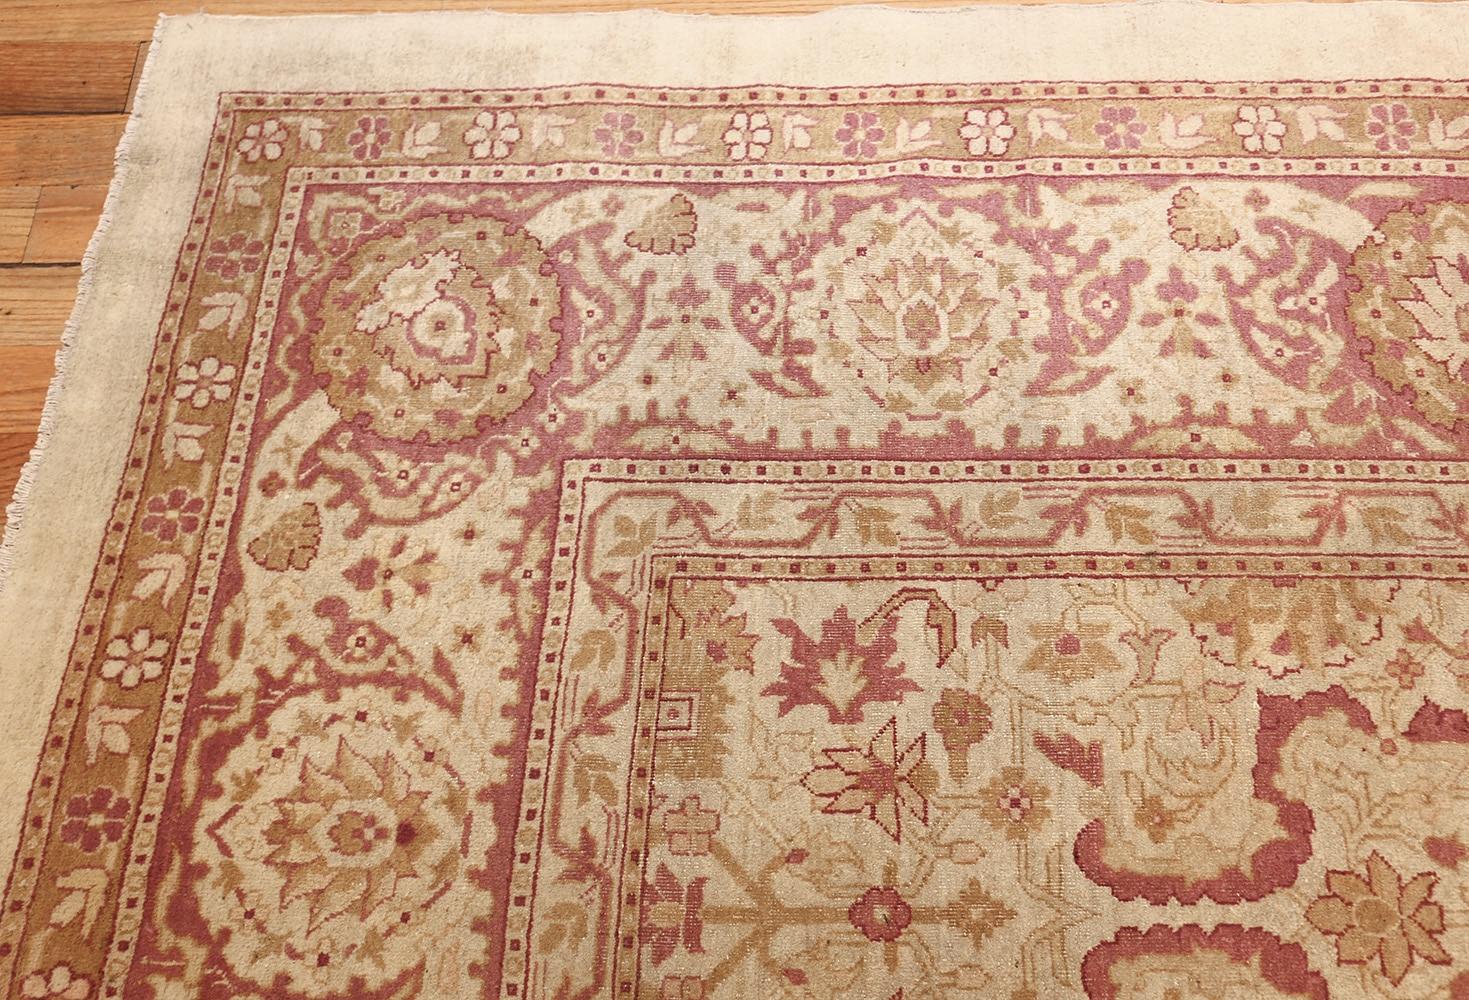 Antique Amritsar rug, origin: India, circa: Turn of the century. Size: 11 ft x 17 ft 6 in (3.35 m x 5.33 m)

Featuring an appealing pallet of ivories and purples, this elegant antique Indian Amritsar carpet is characterized by a meticulously woven